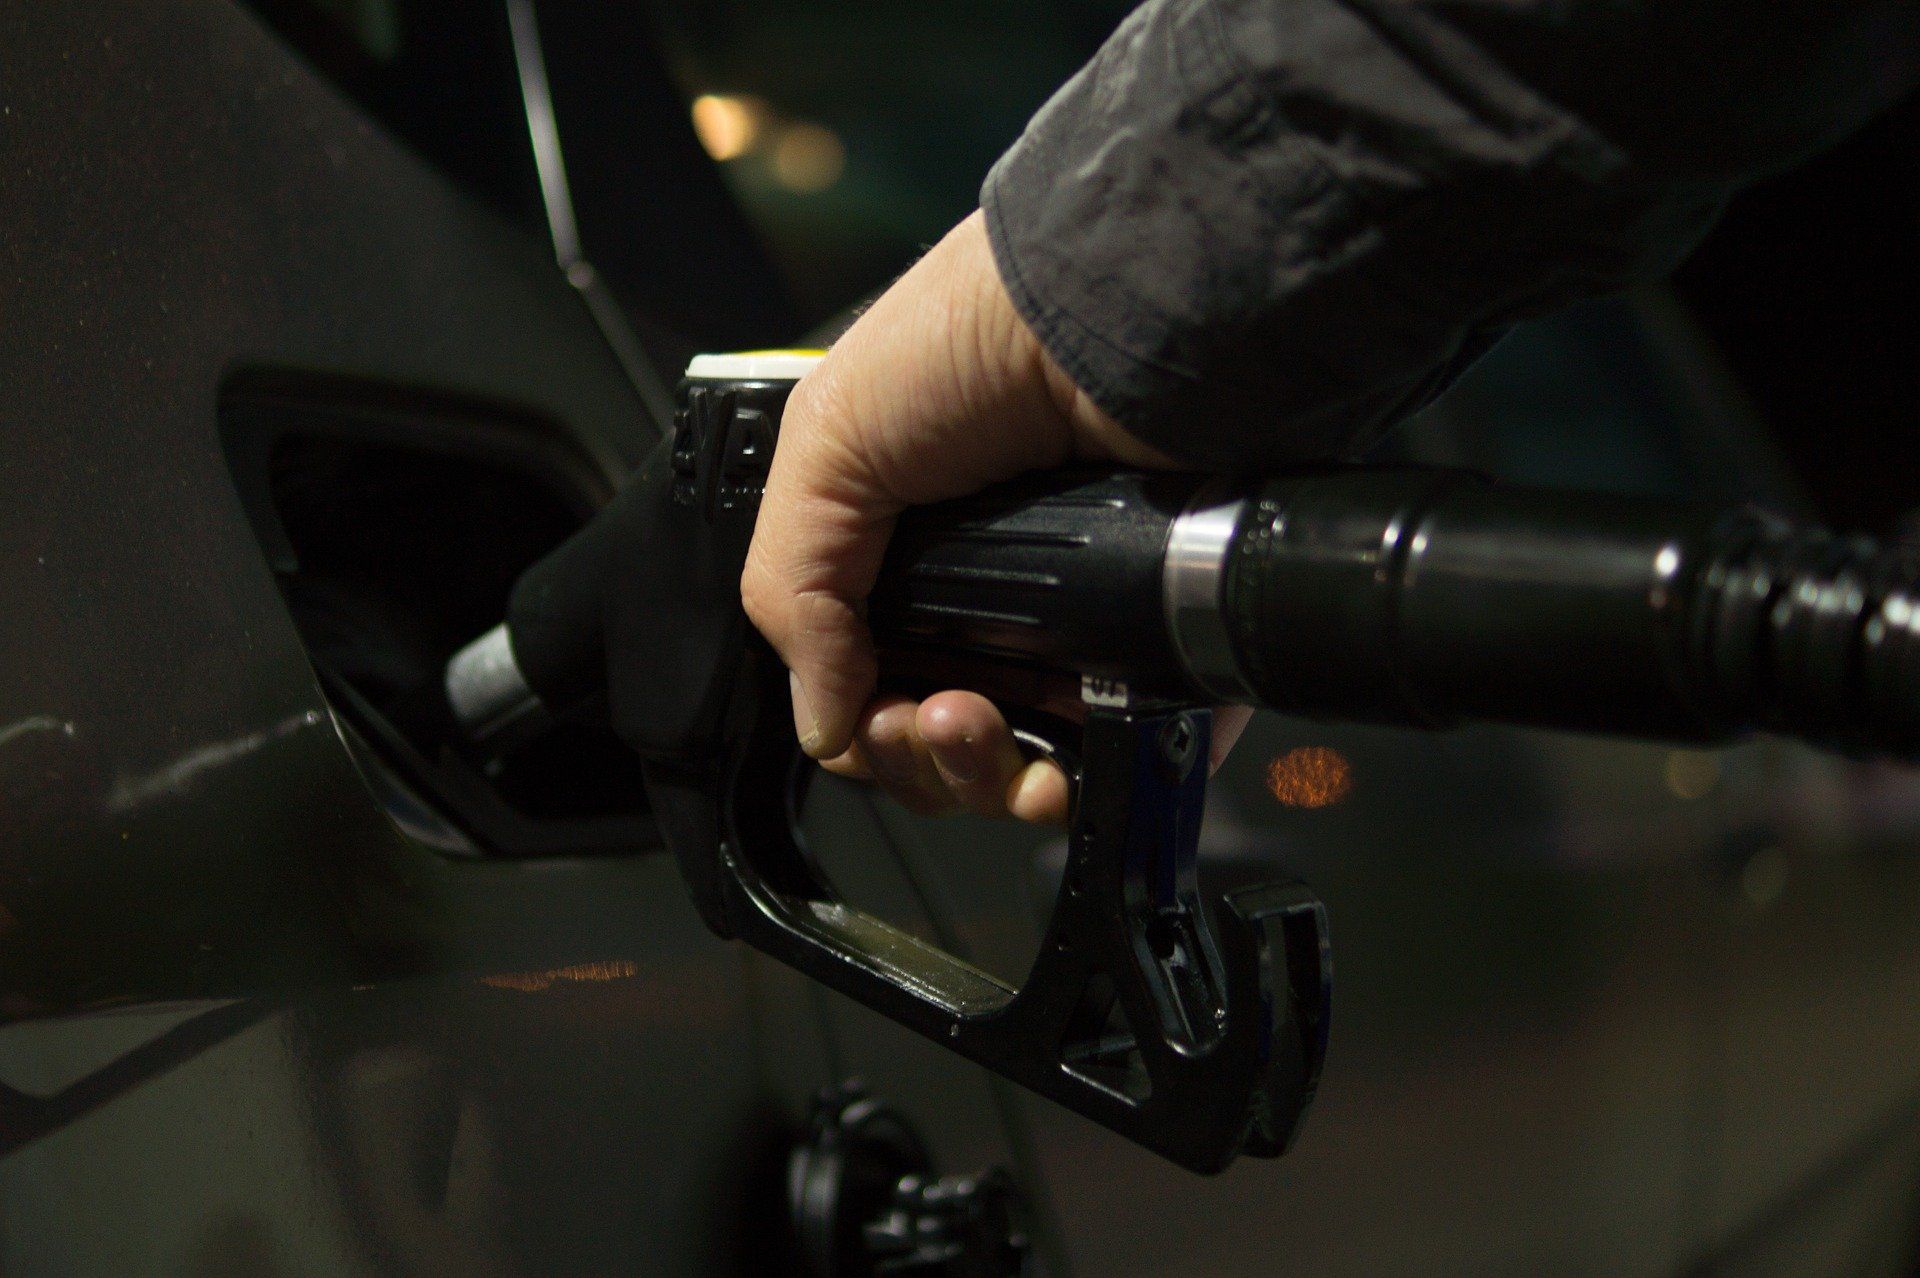 Fuel price today: Petrol and Diesel rates remain unchanged on May 5, 2022